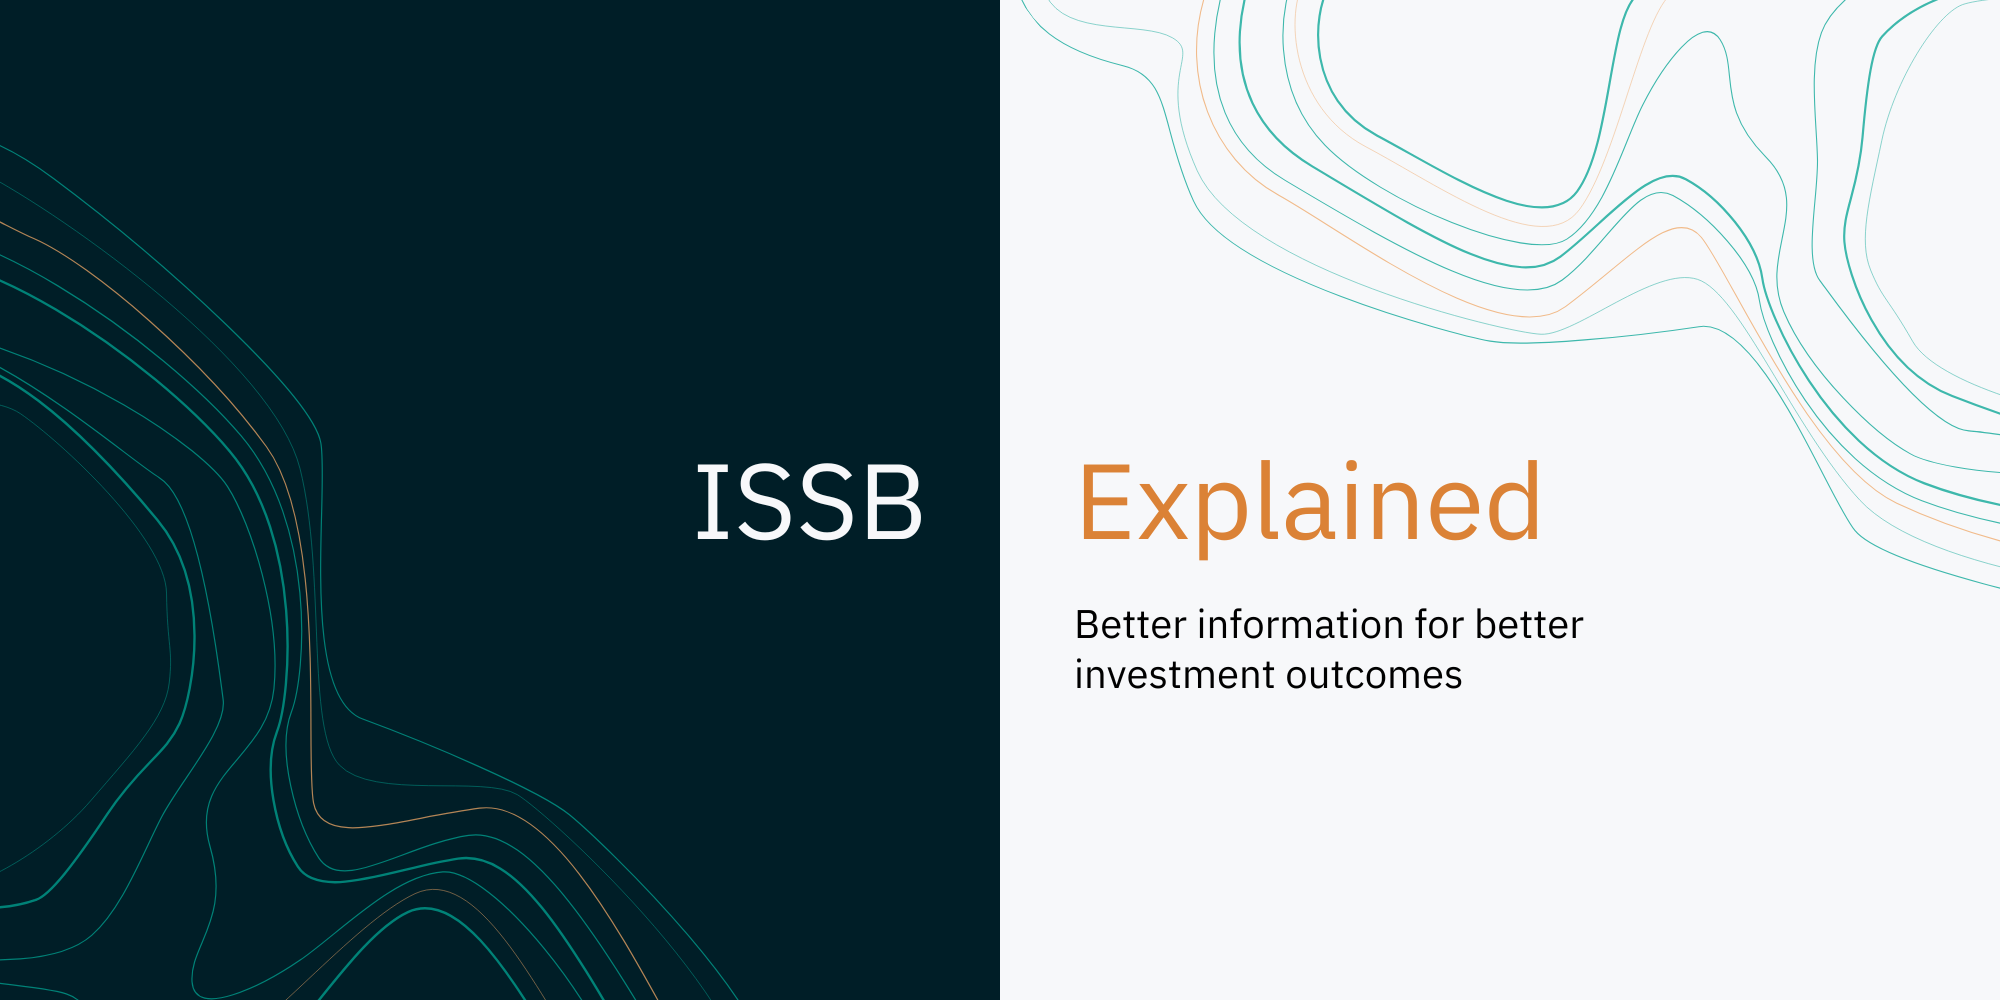 ISSB Explained: Better information for better investment outcomes